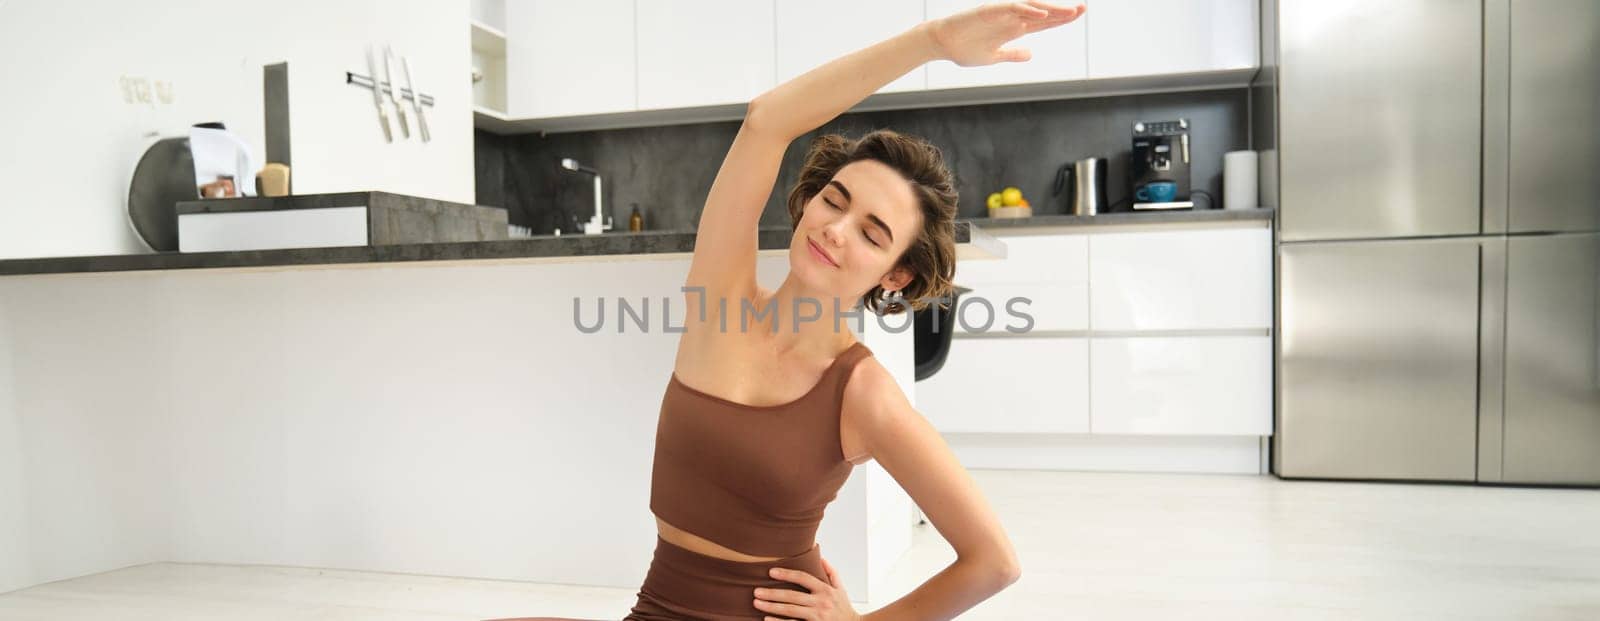 Portrait of fitness woman doing exercises in bright room at home, stretching in lotus pose, sitting on rubber yoga mat and doing workout training, drinking water from bottle.